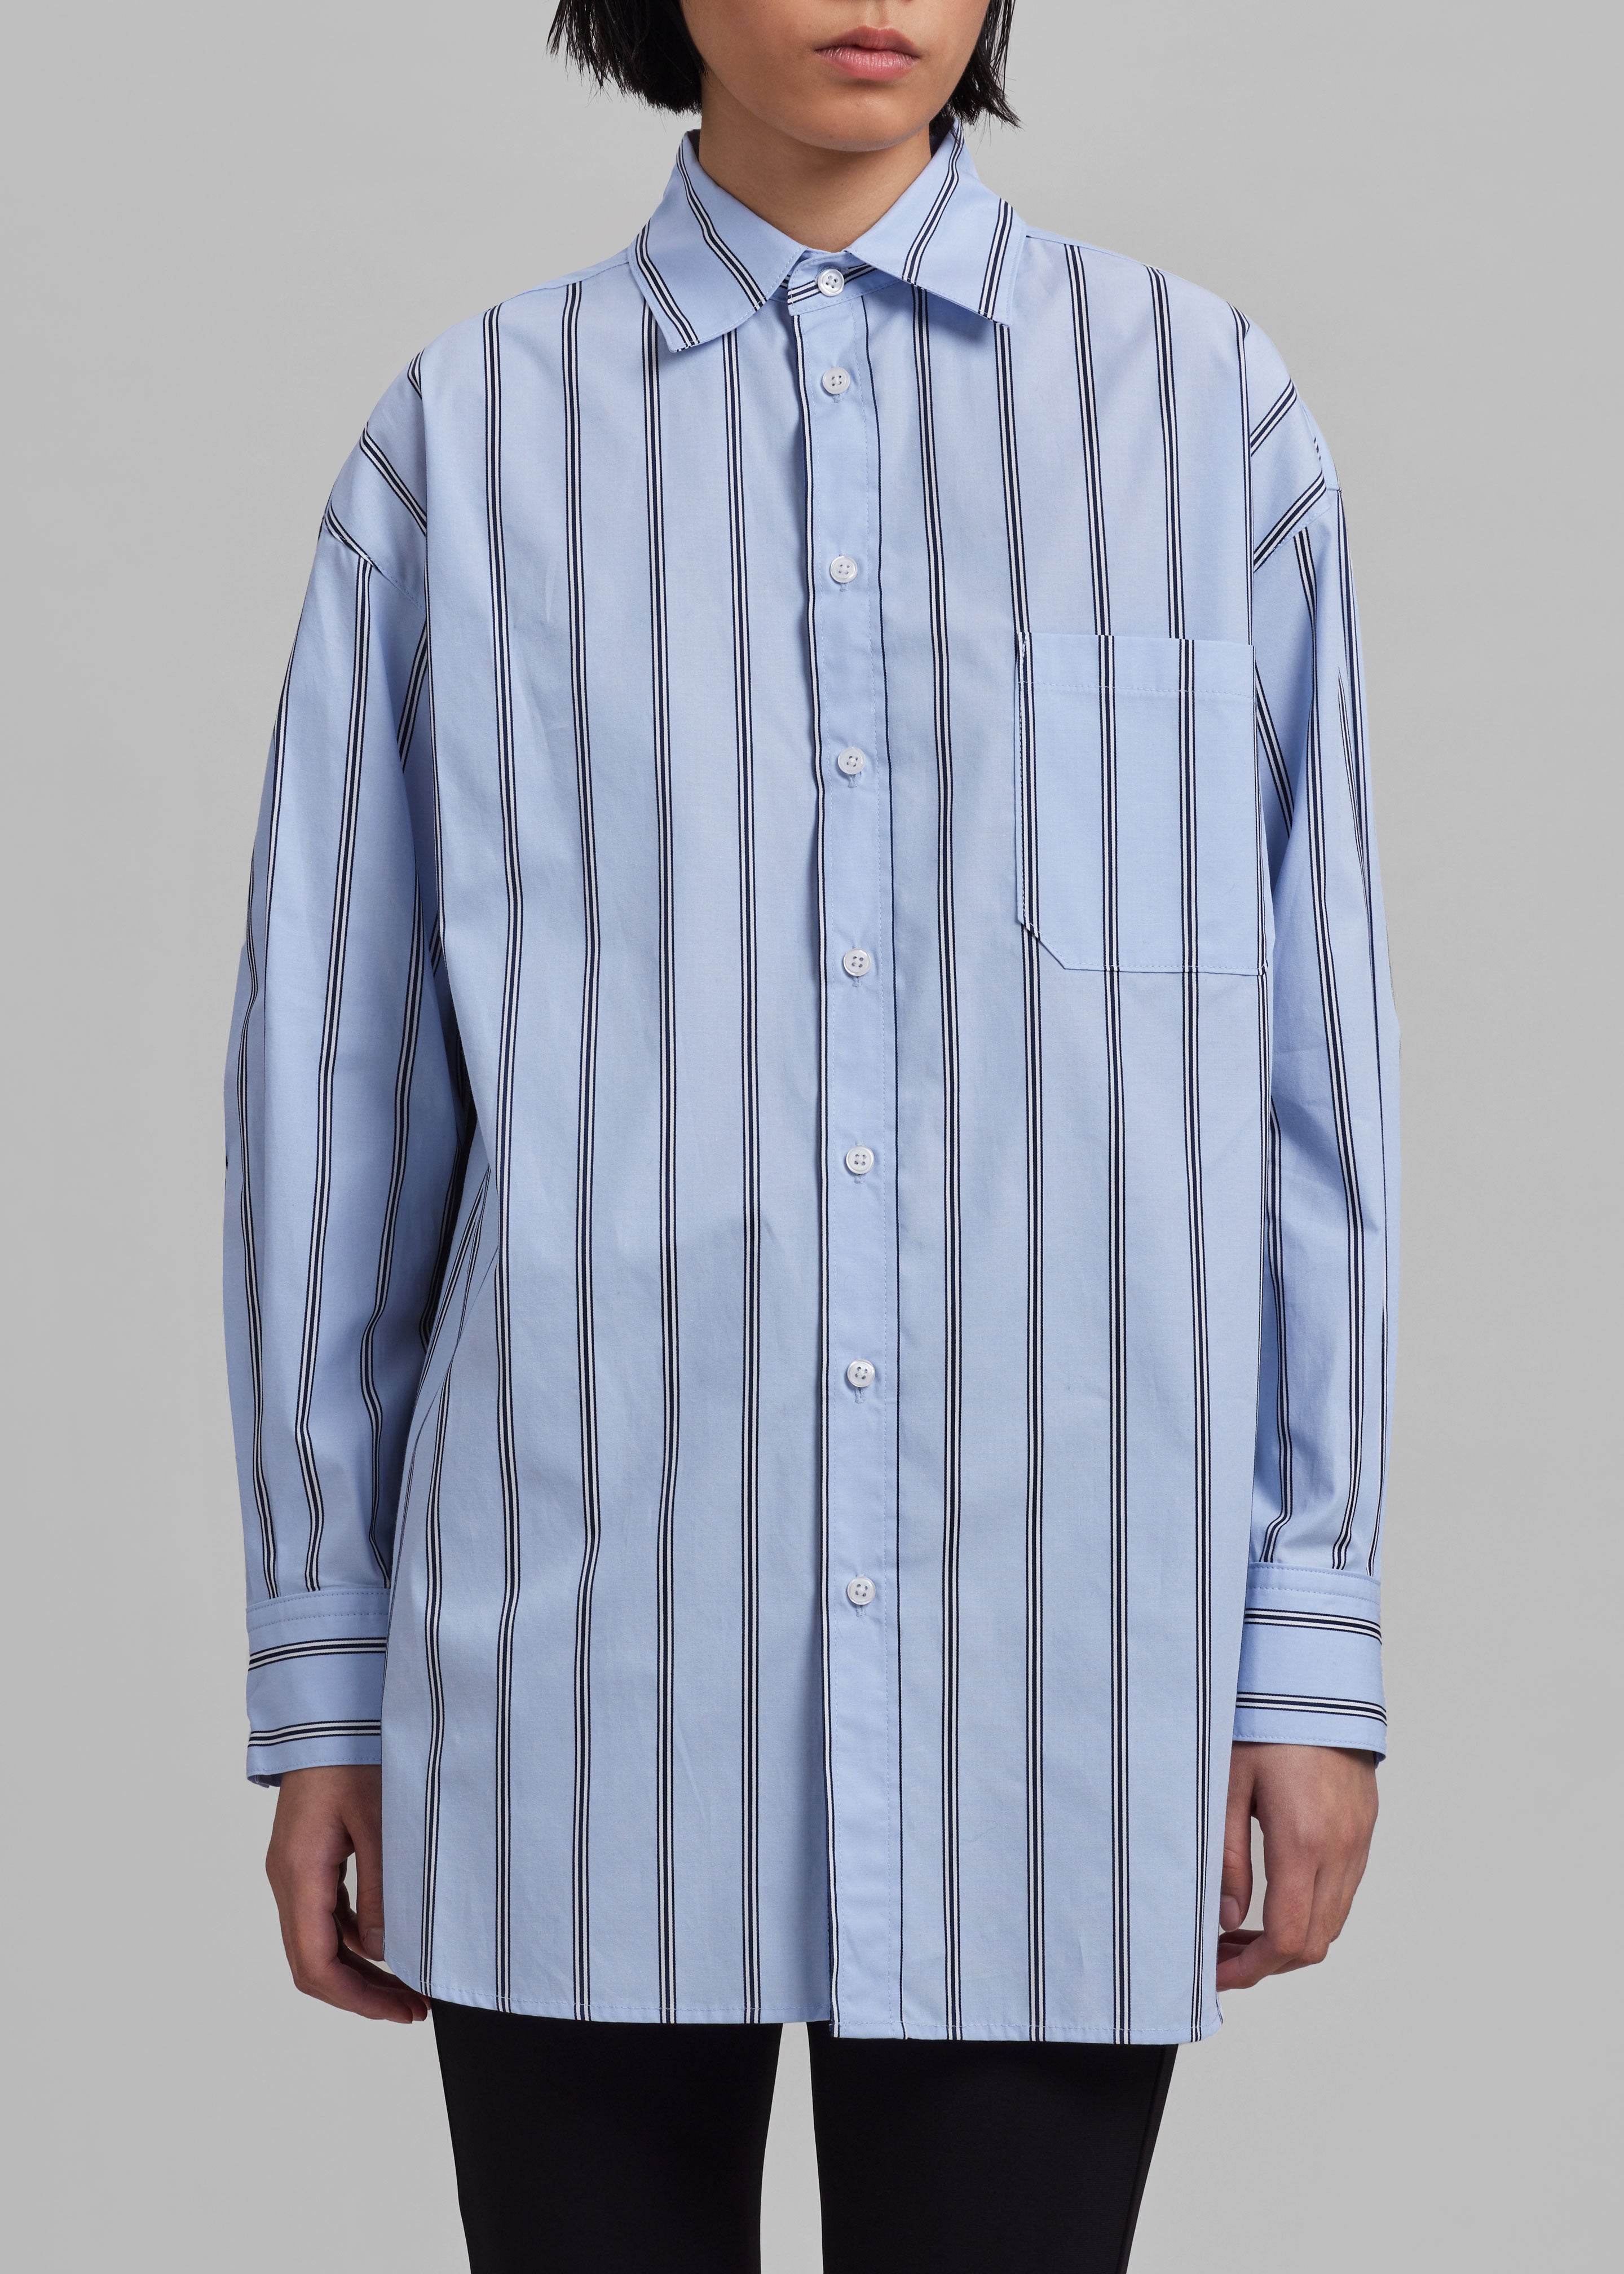 Puppets And Puppets Cronenberg Oversized Striped Button Down Shirt - Blue Stripe - 4